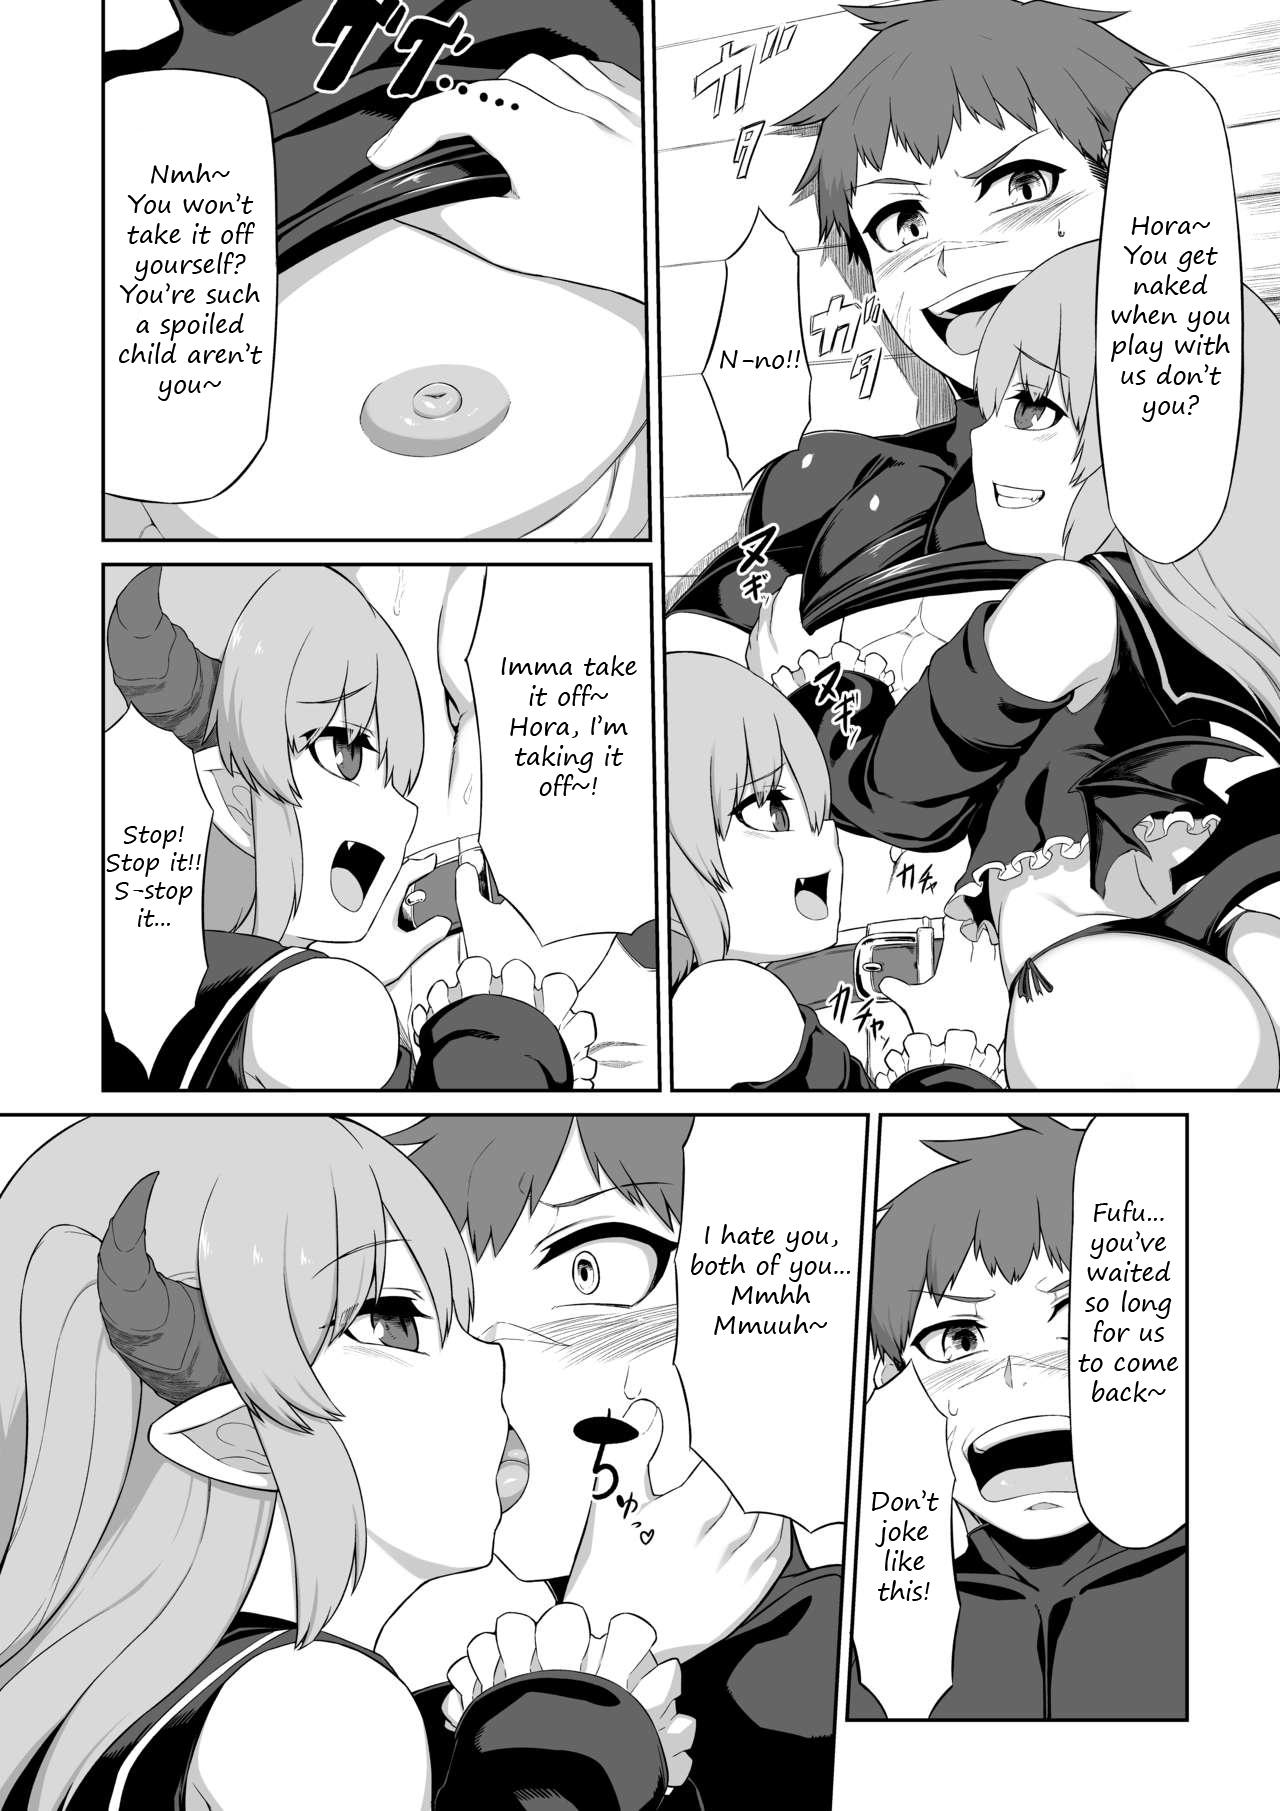 Shecock Futago Succubus to Mahou no Onaho | The Succubus Twins and the Magical Onahole - Original Bwc - Page 7